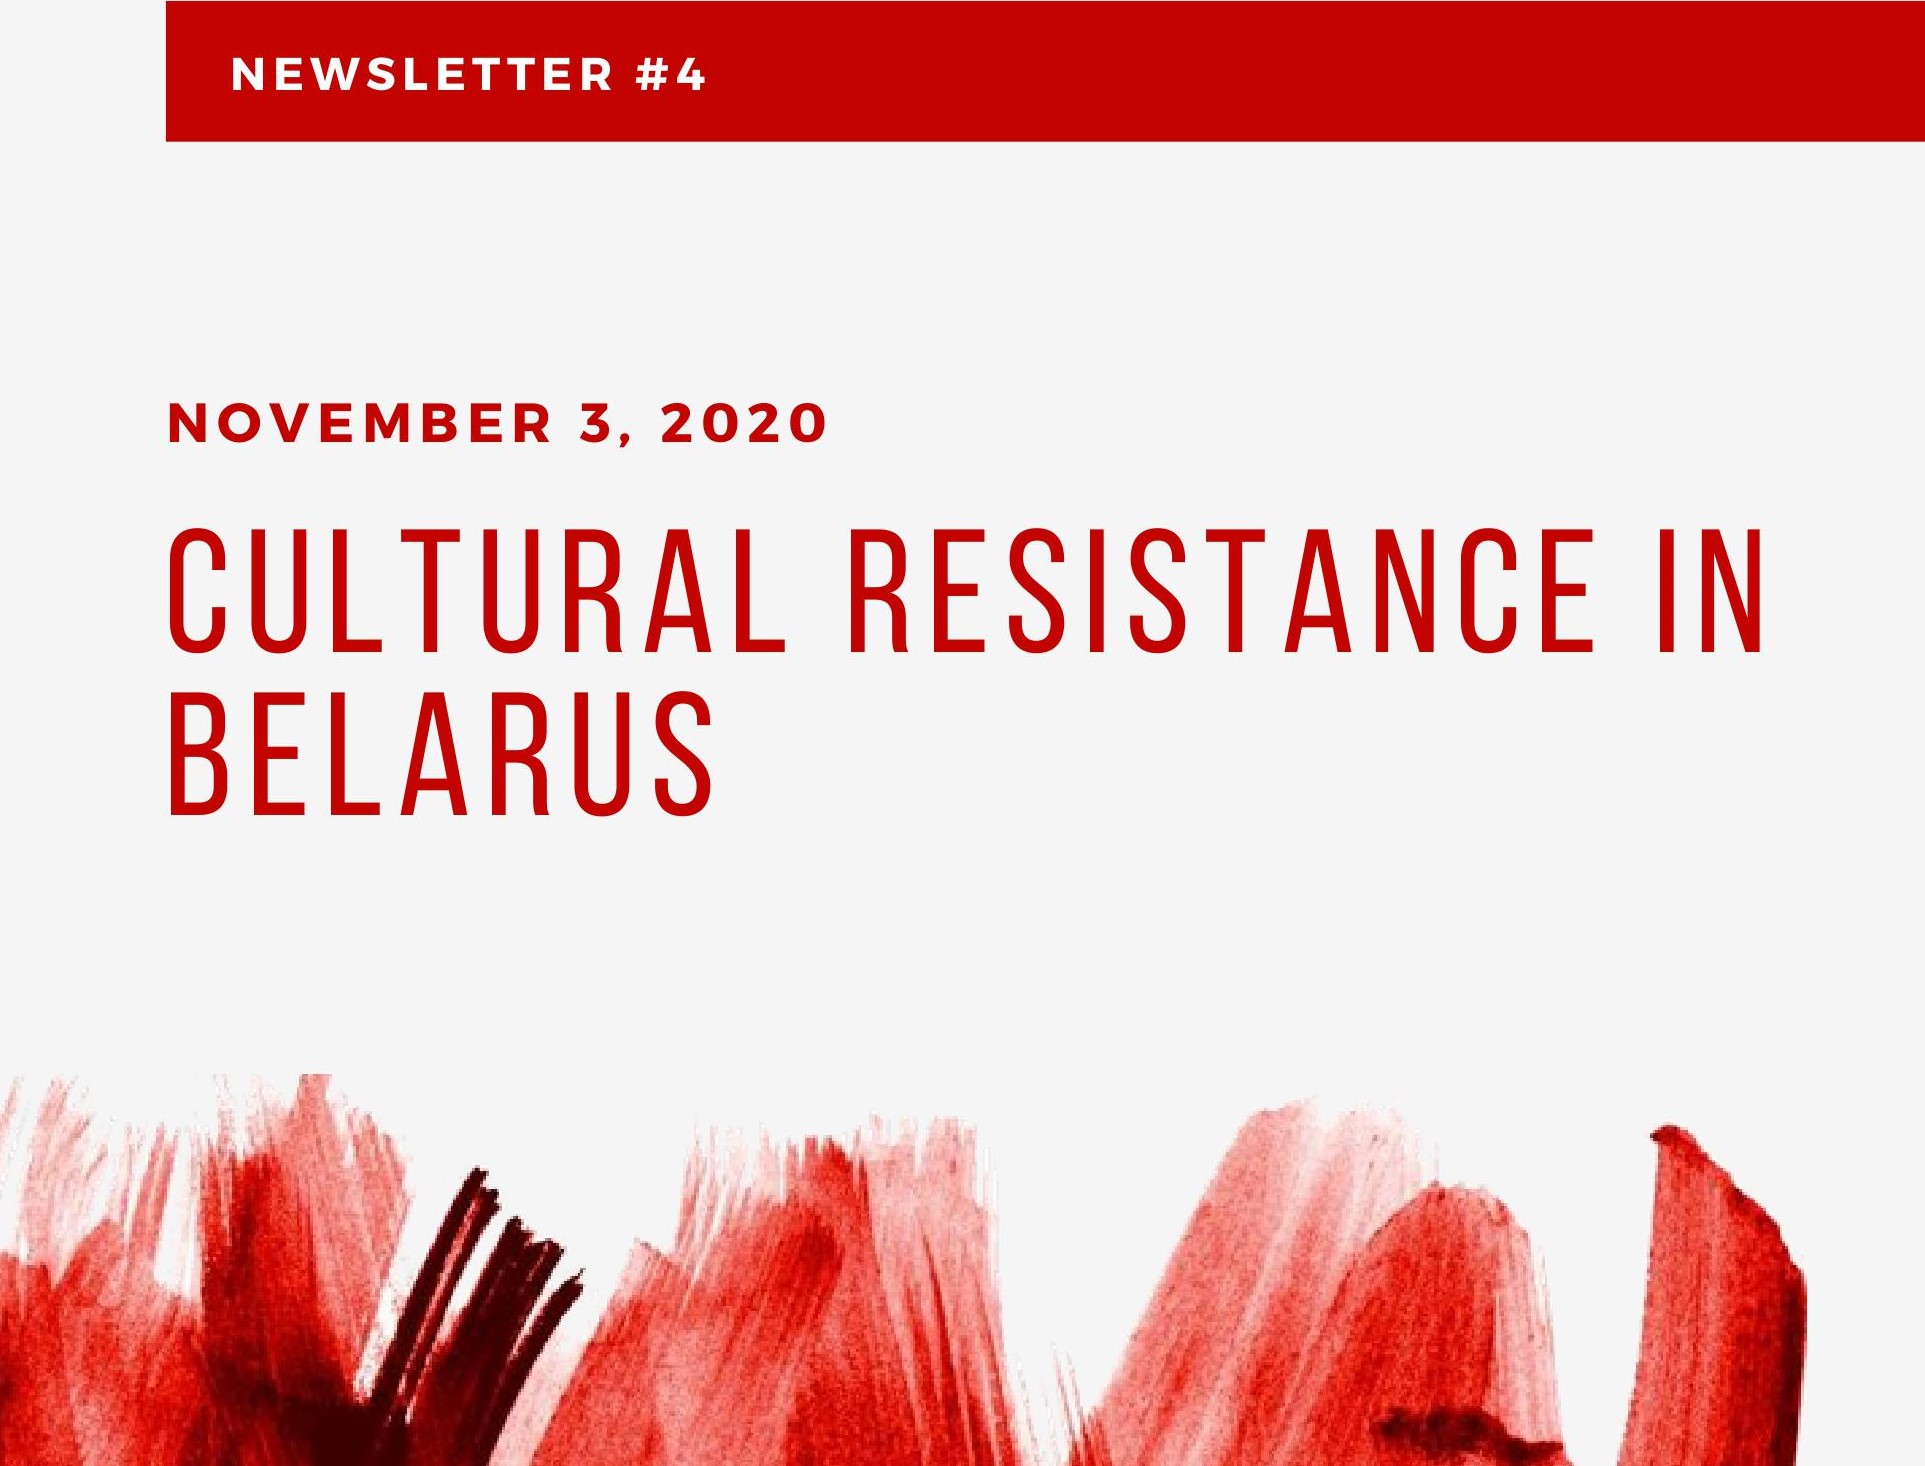 Newsletter #4: Belarusian Culture in Times of Political Crisis